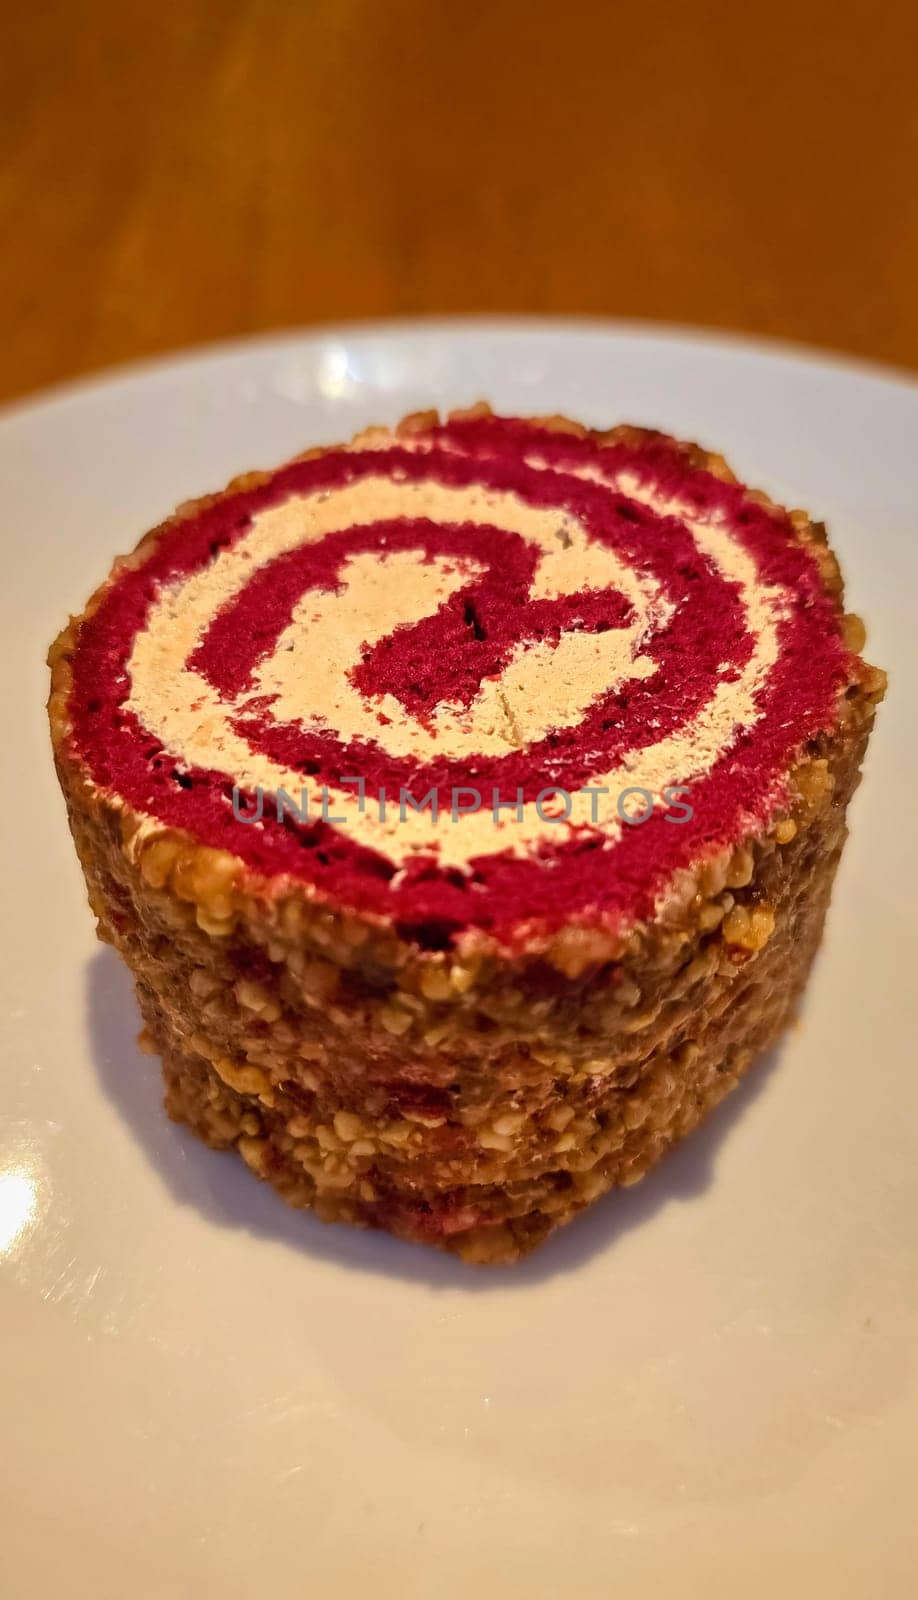 Red Velvet Roll Cake with candied peanuts shred topping for cooking content ideas